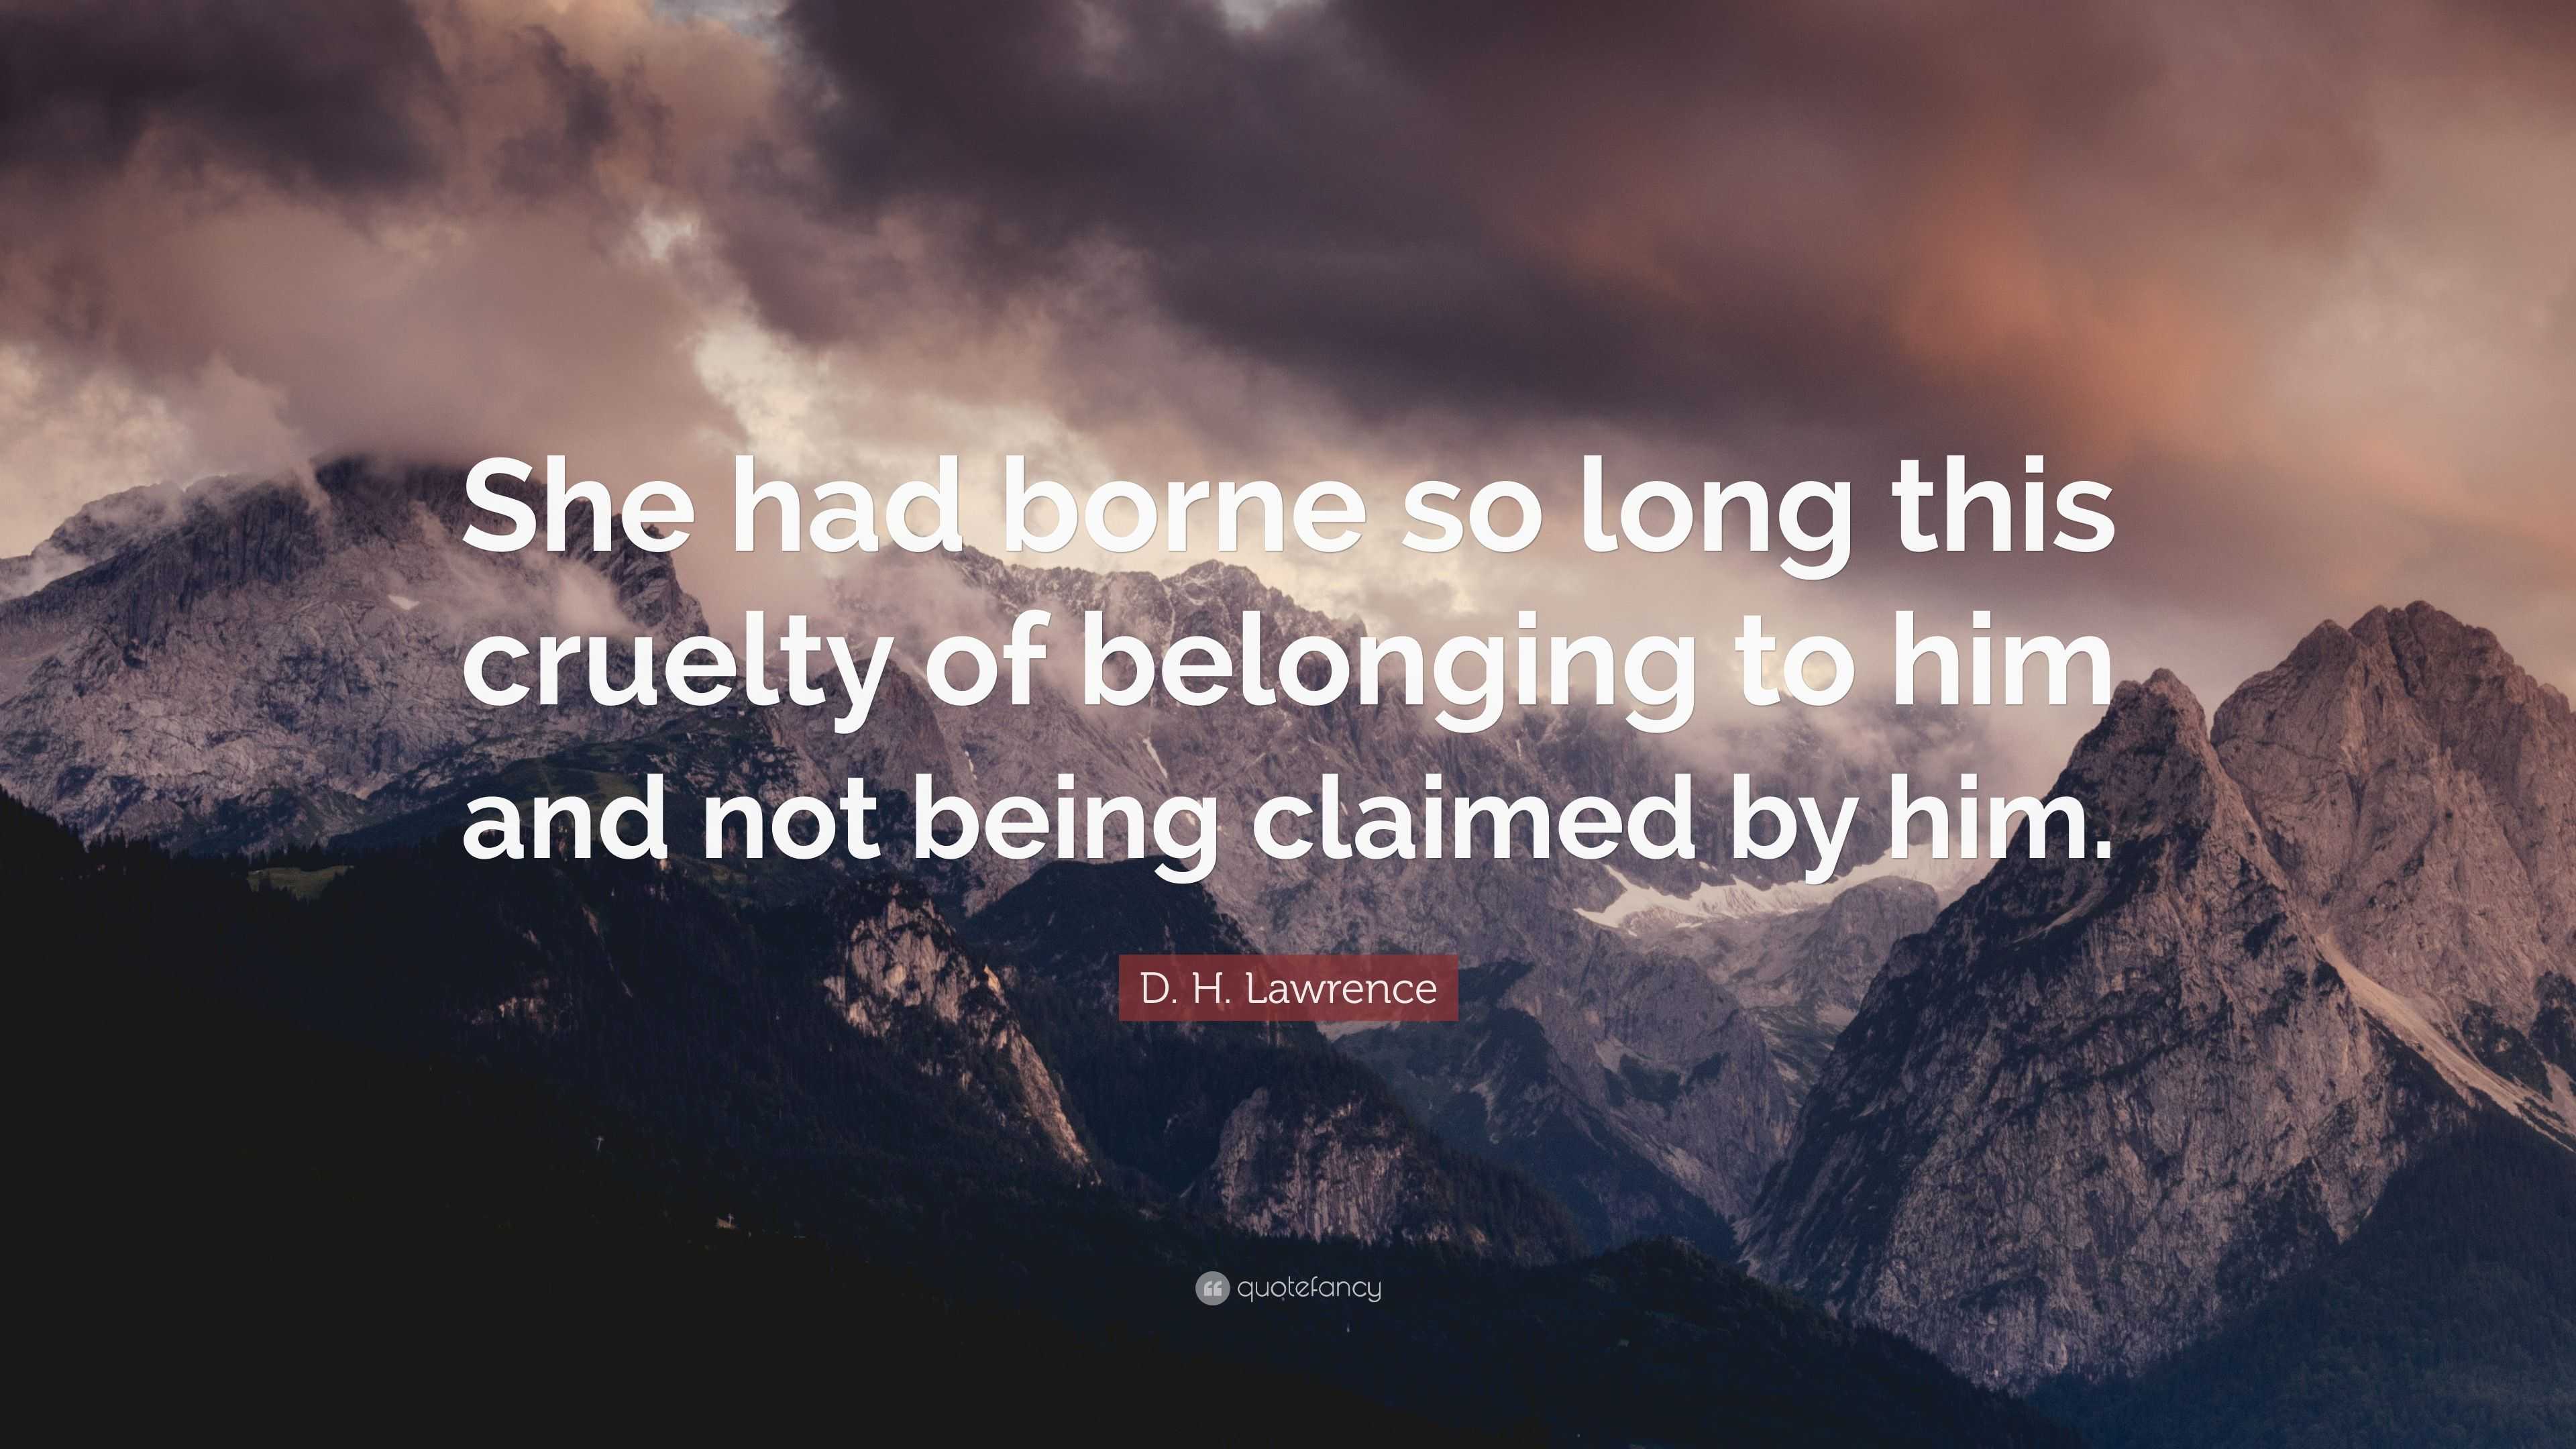 D. H. Lawrence Quote: “She had borne so long this cruelty of belonging ...